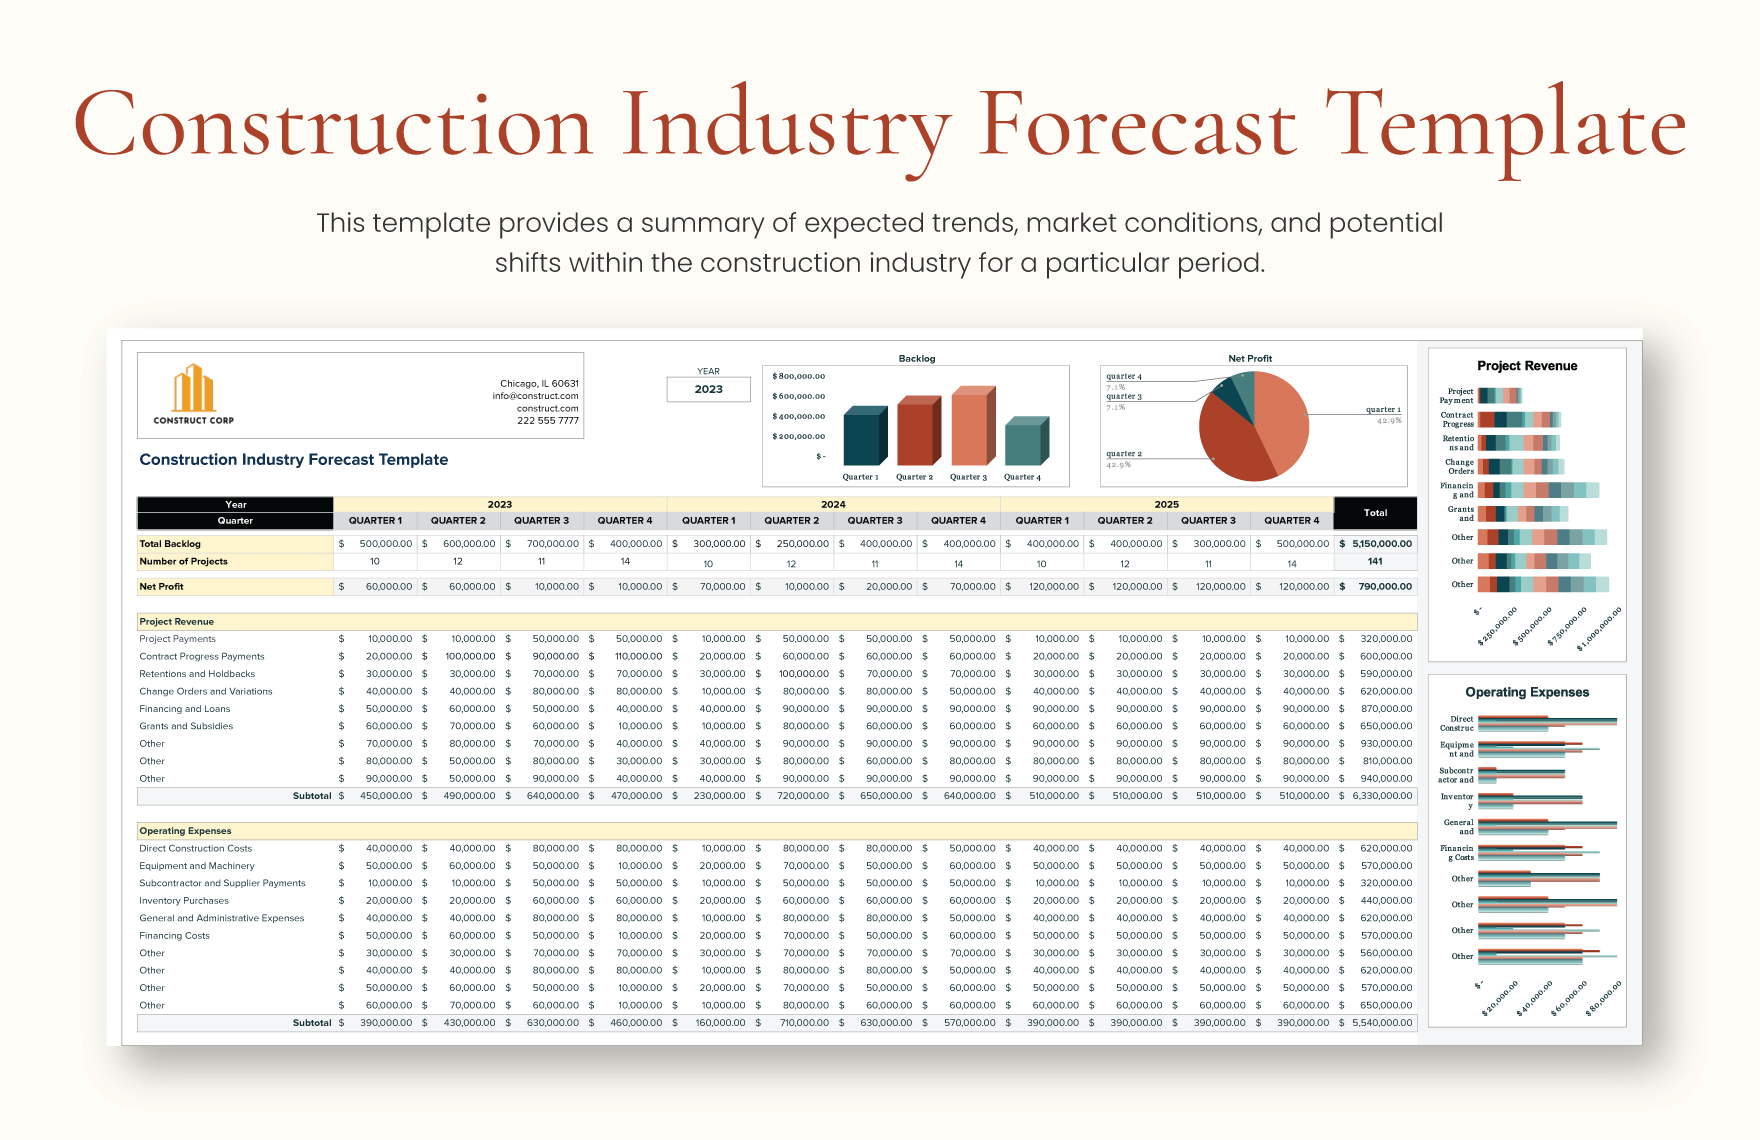 Construction Industry Forecast Template